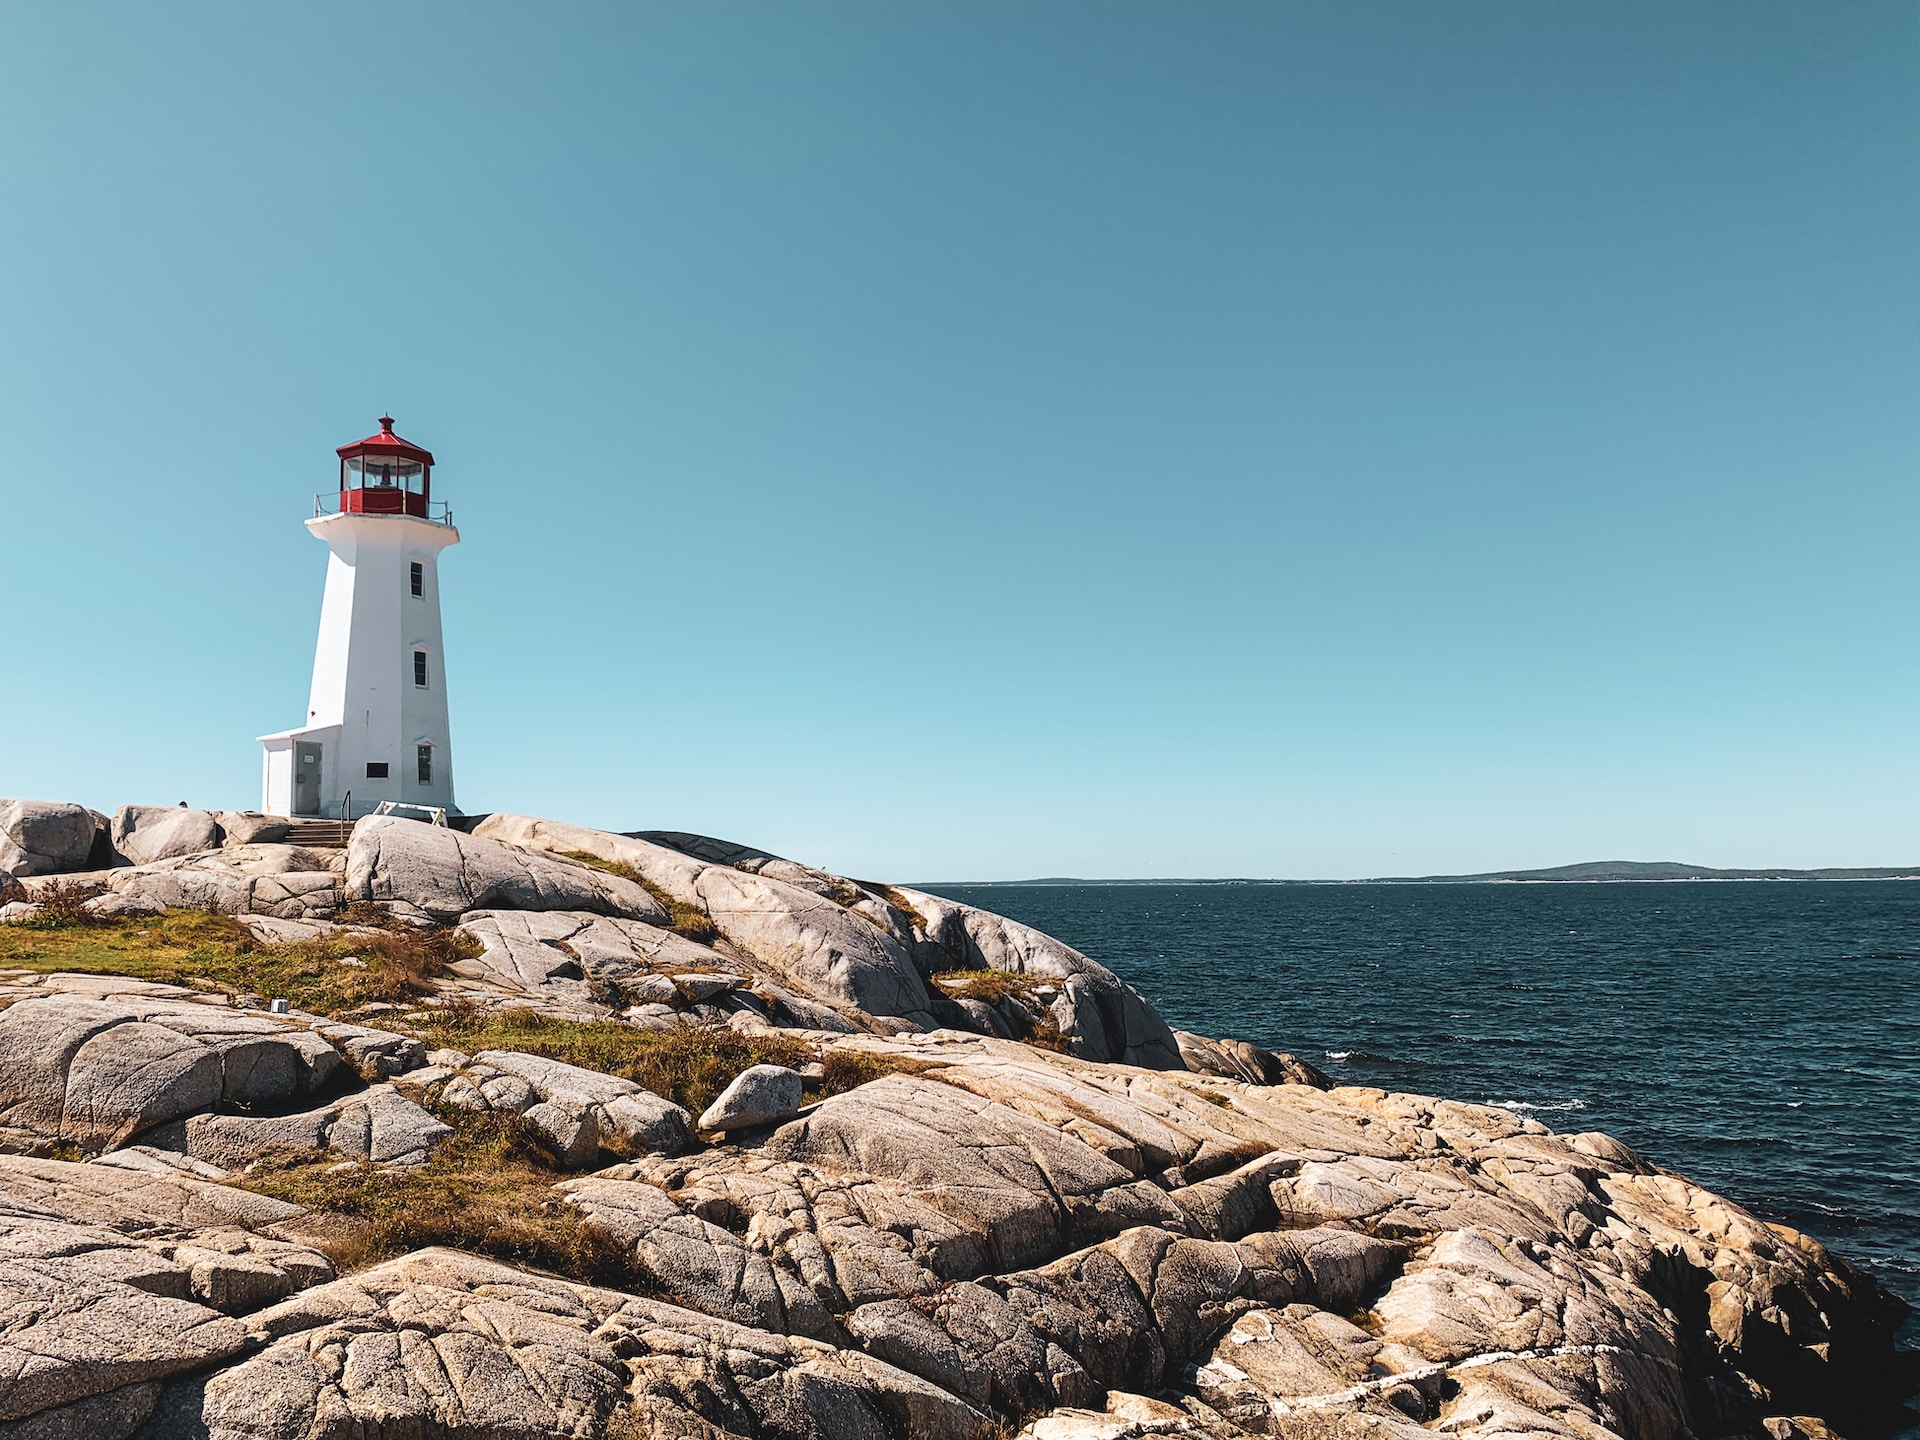 Injured in Nova Scotia? Here’s Why You Should Consult a Personal Injury Lawyer